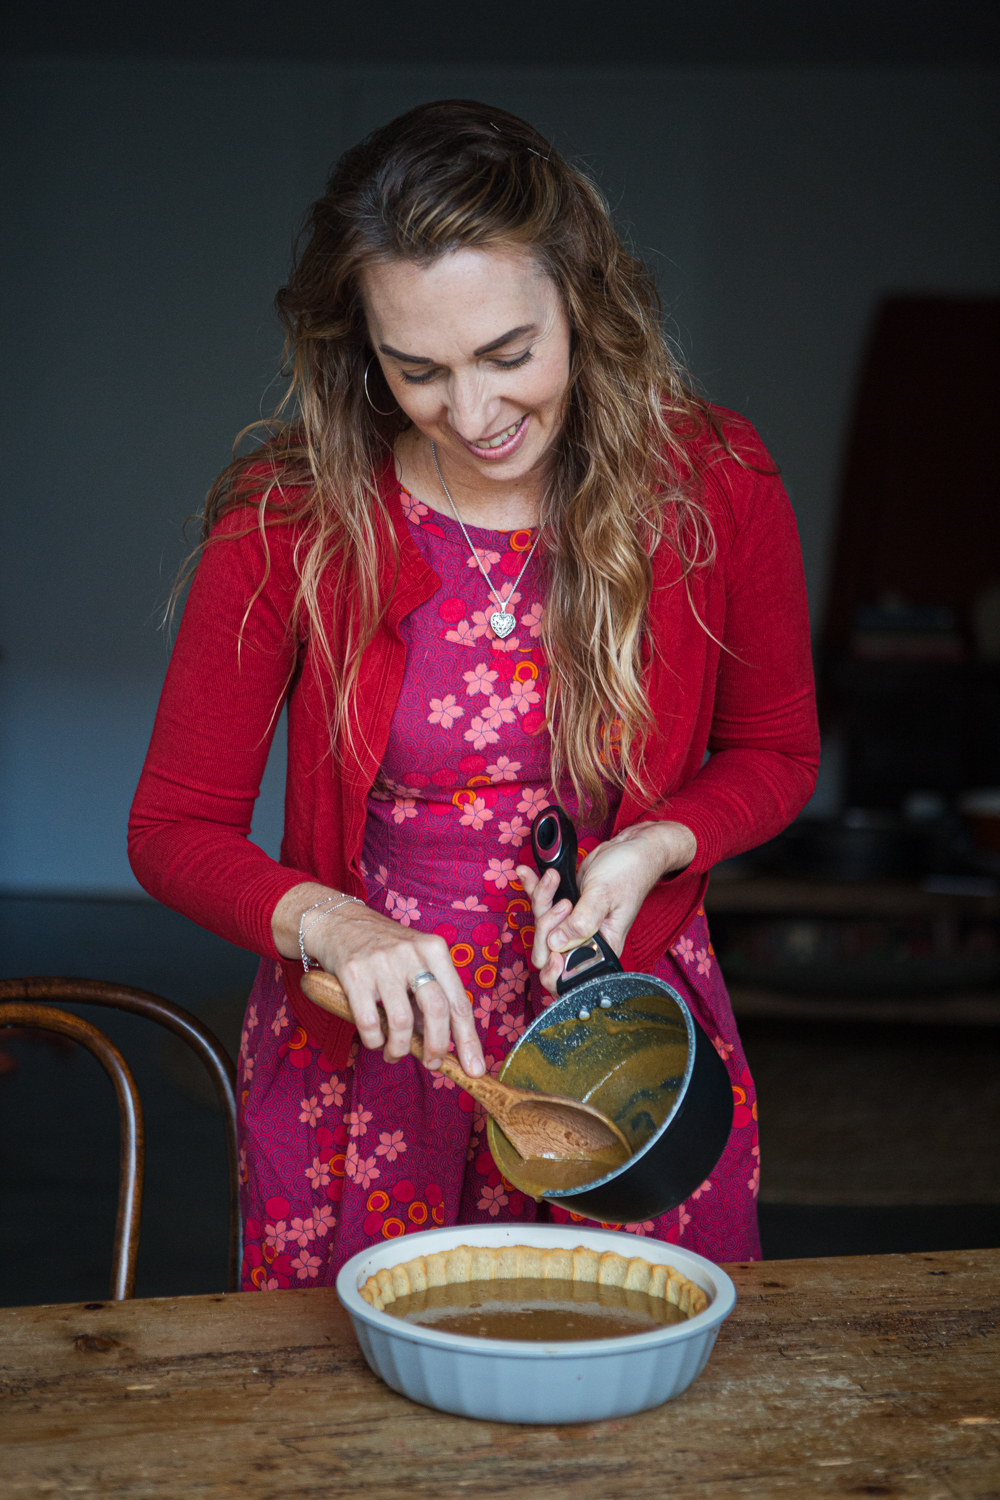 Jo Whitton, Simple Healing Food by Quirky Cooking